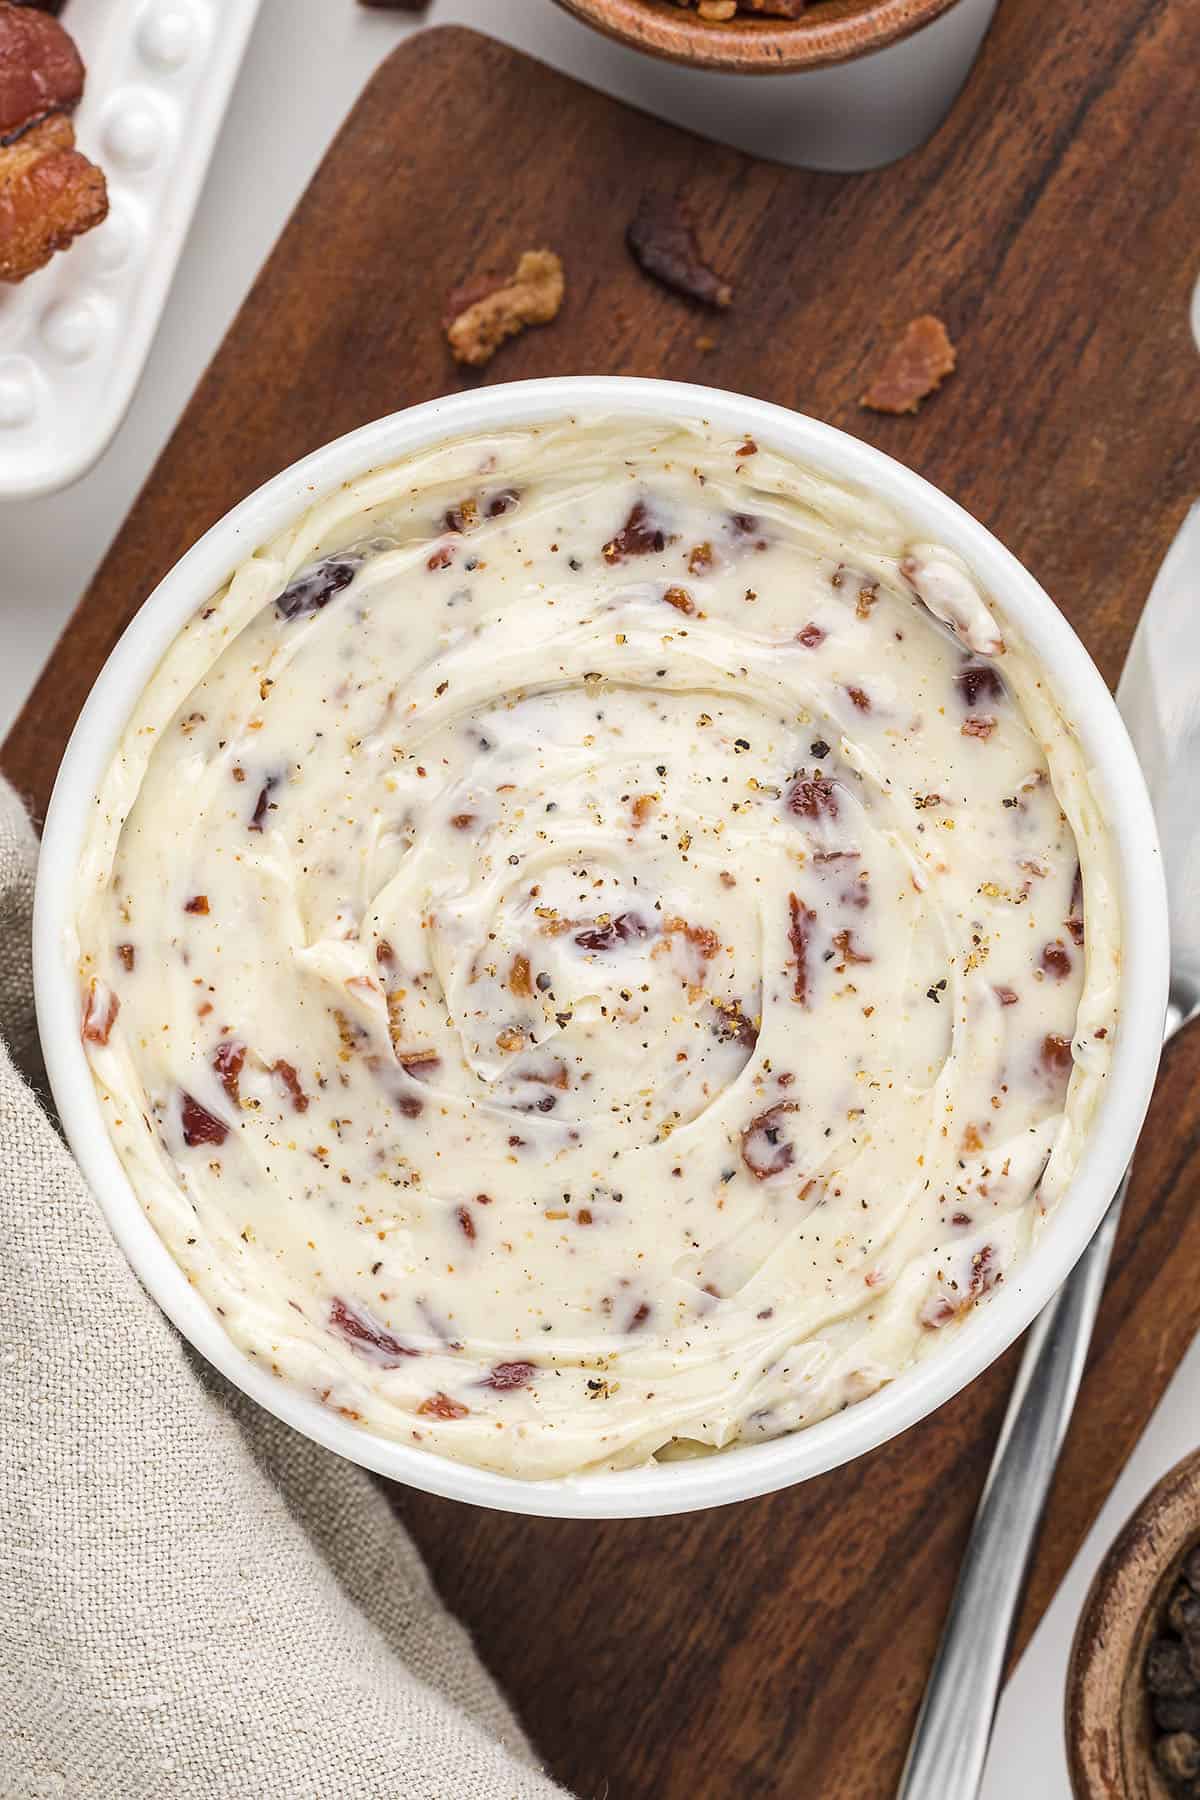 Bacon butter in small white serving dish.